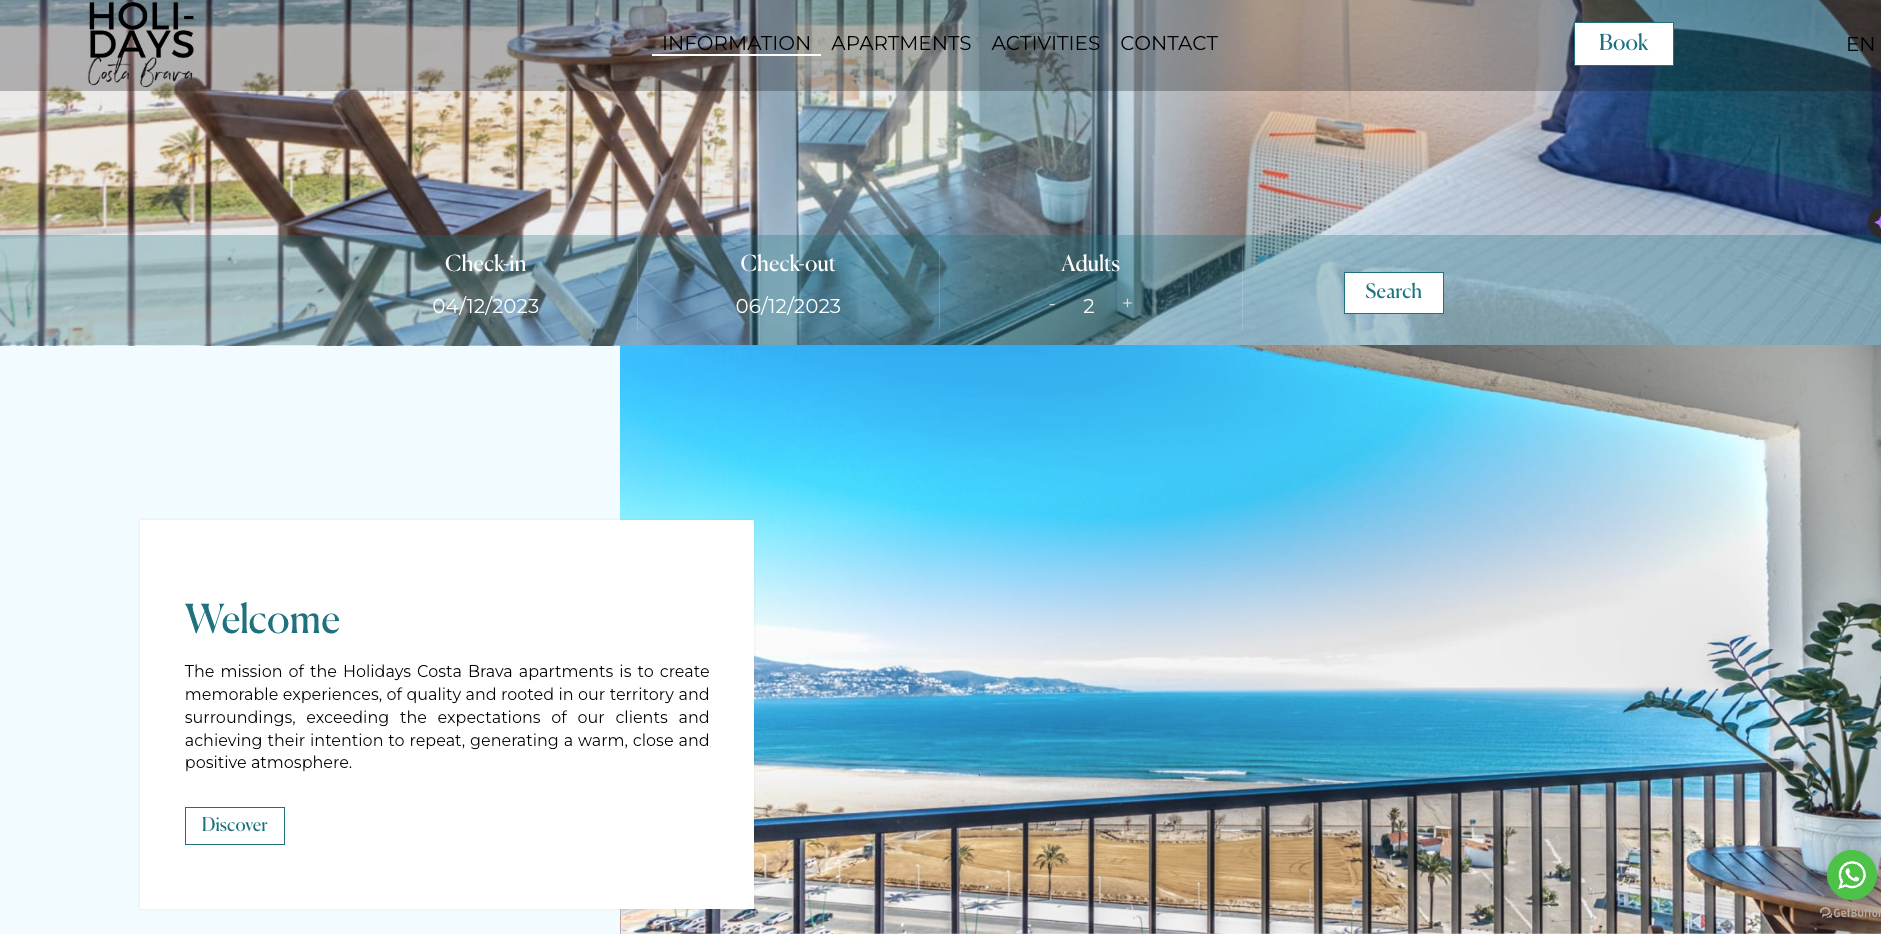 Infographic of an example of best hotel website design: "The Holidays Costa Brava"